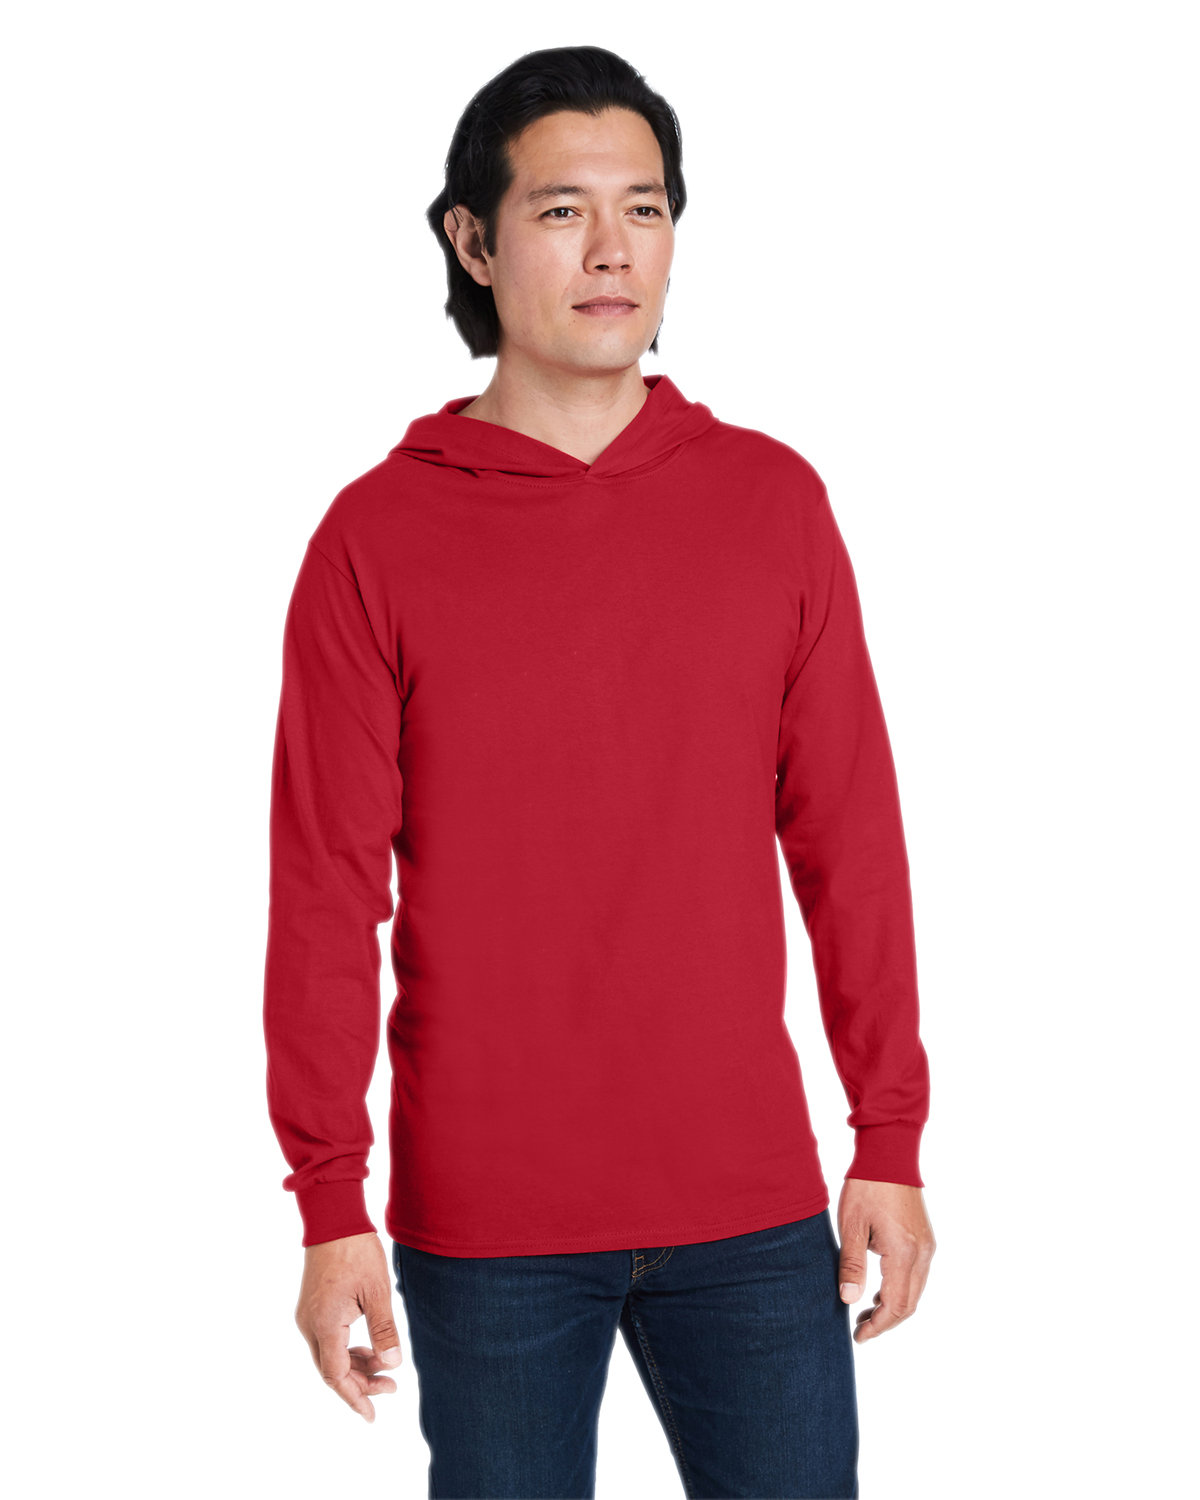 Fruit of the Loom Men's HD Cotton™ Jersey Hooded T-Shirt TRUE RED 